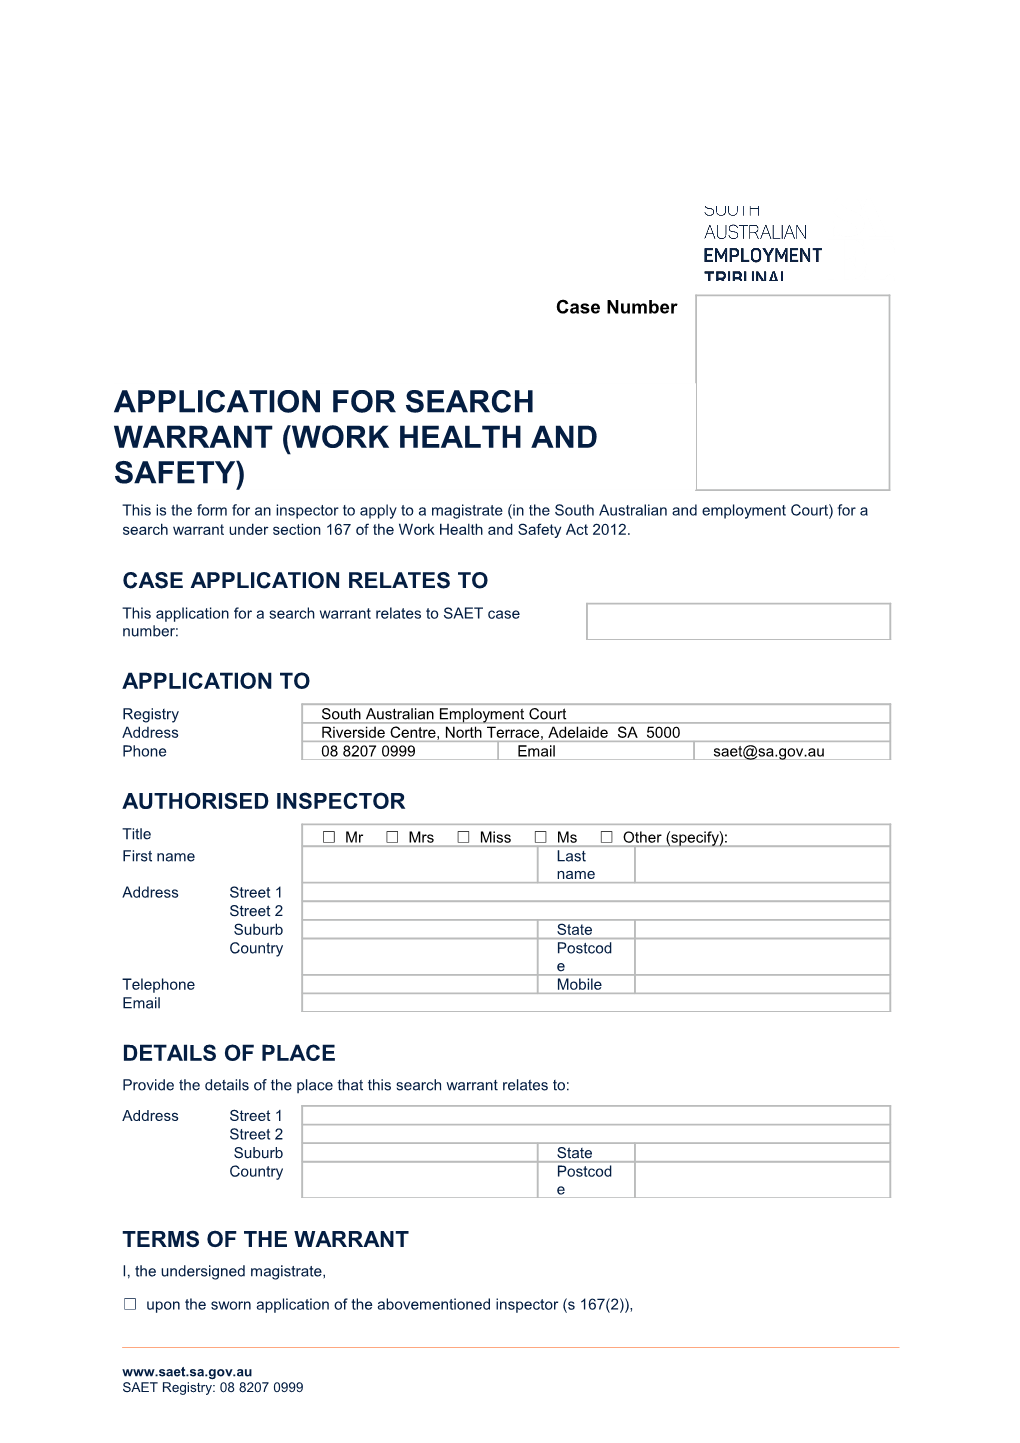 Application for Search Warrant (Work Health and Safety)